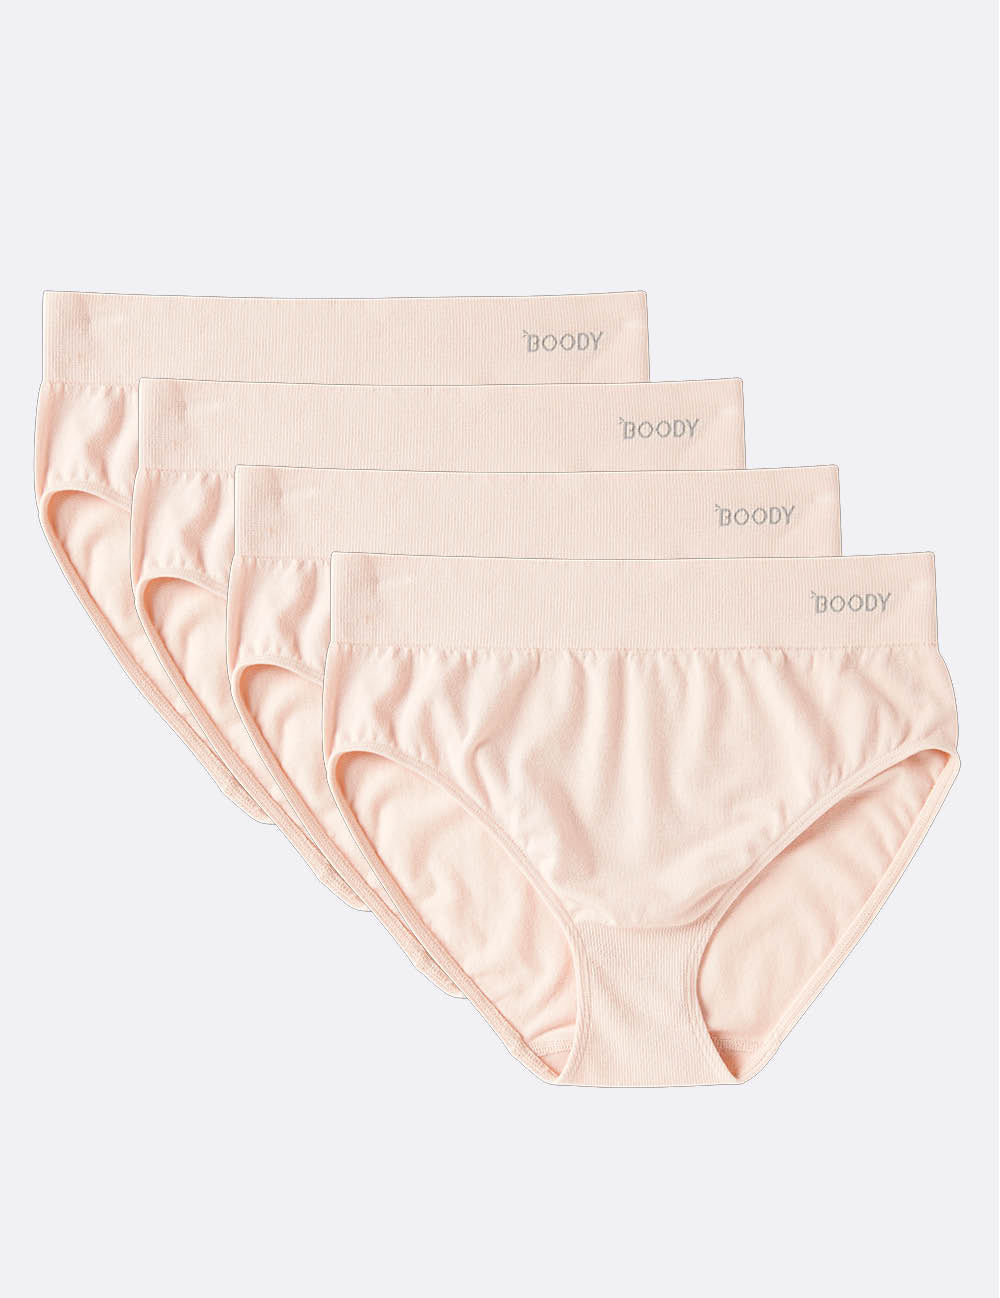 Boody Bamboo 4-pack of Full Brief Women's Underwear in Nude